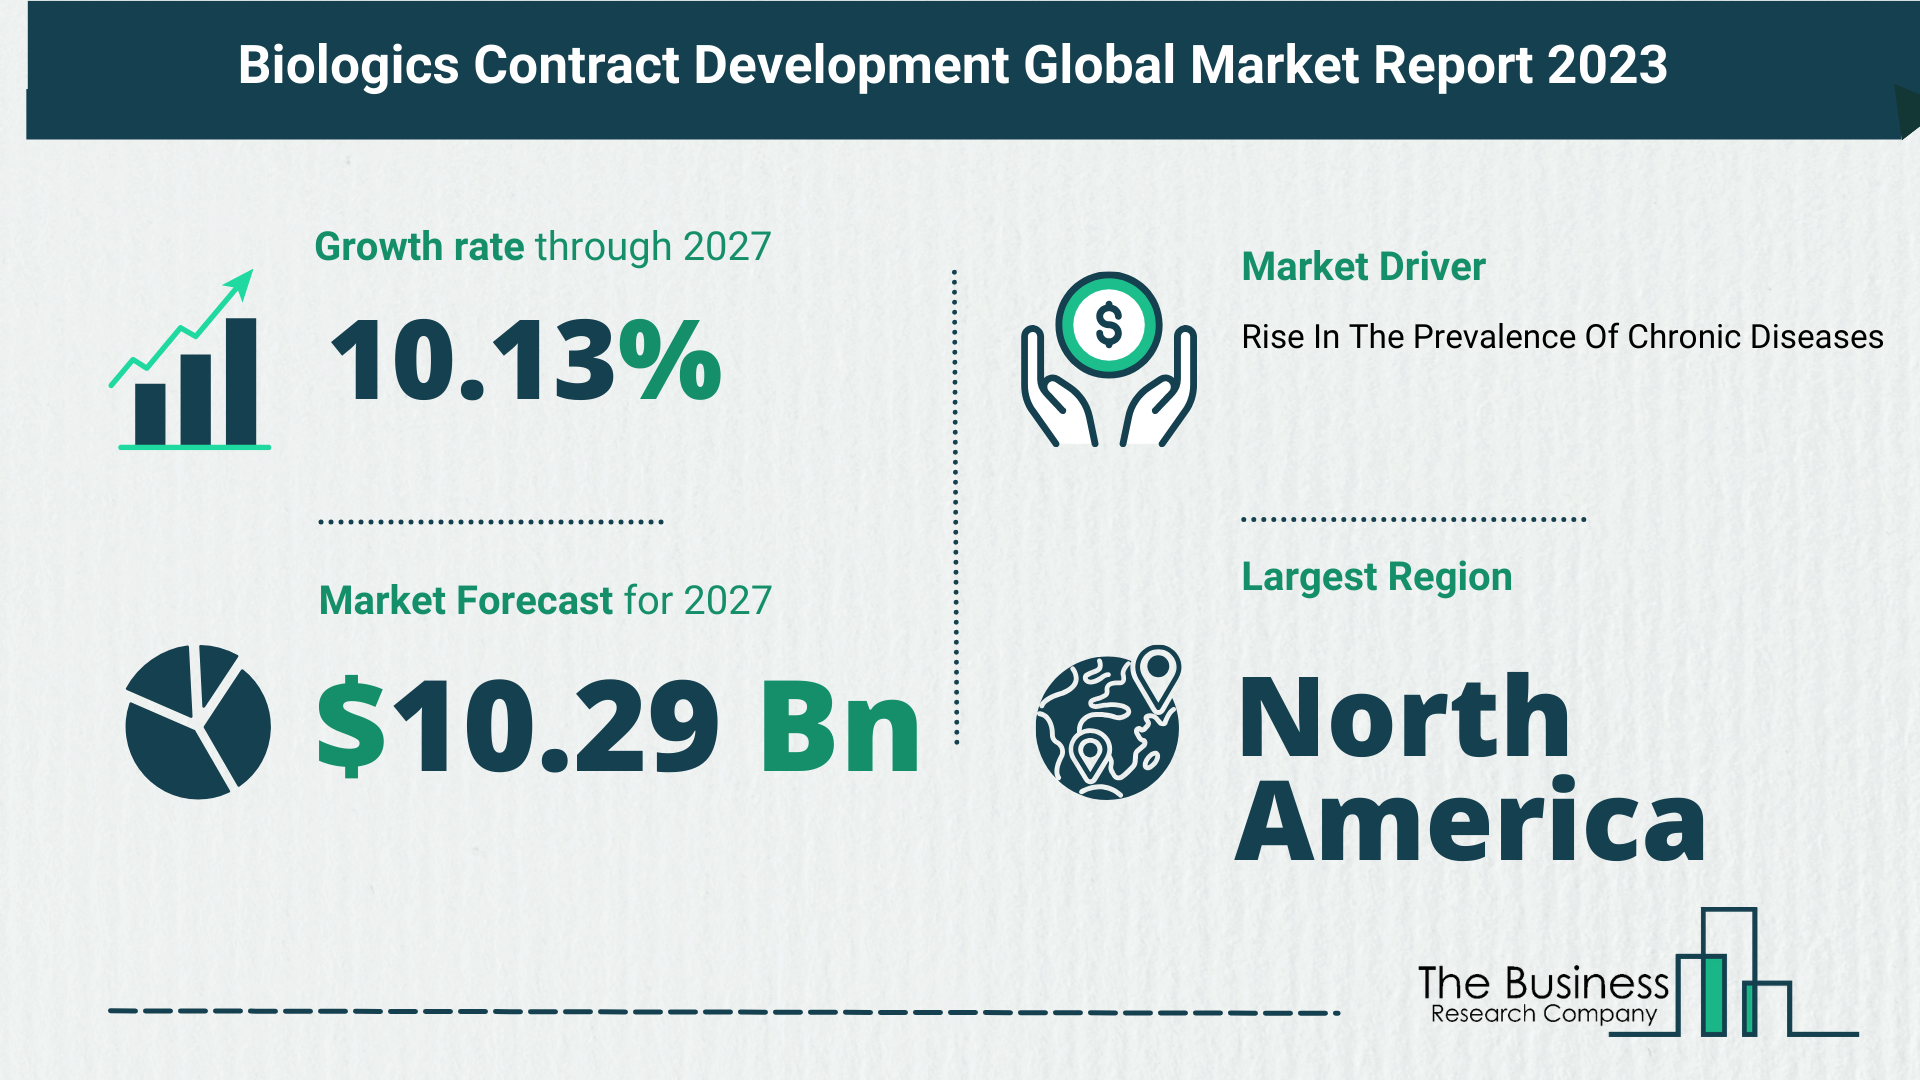 Key Trends And Drivers In The Biologics Contract Development Market 2023